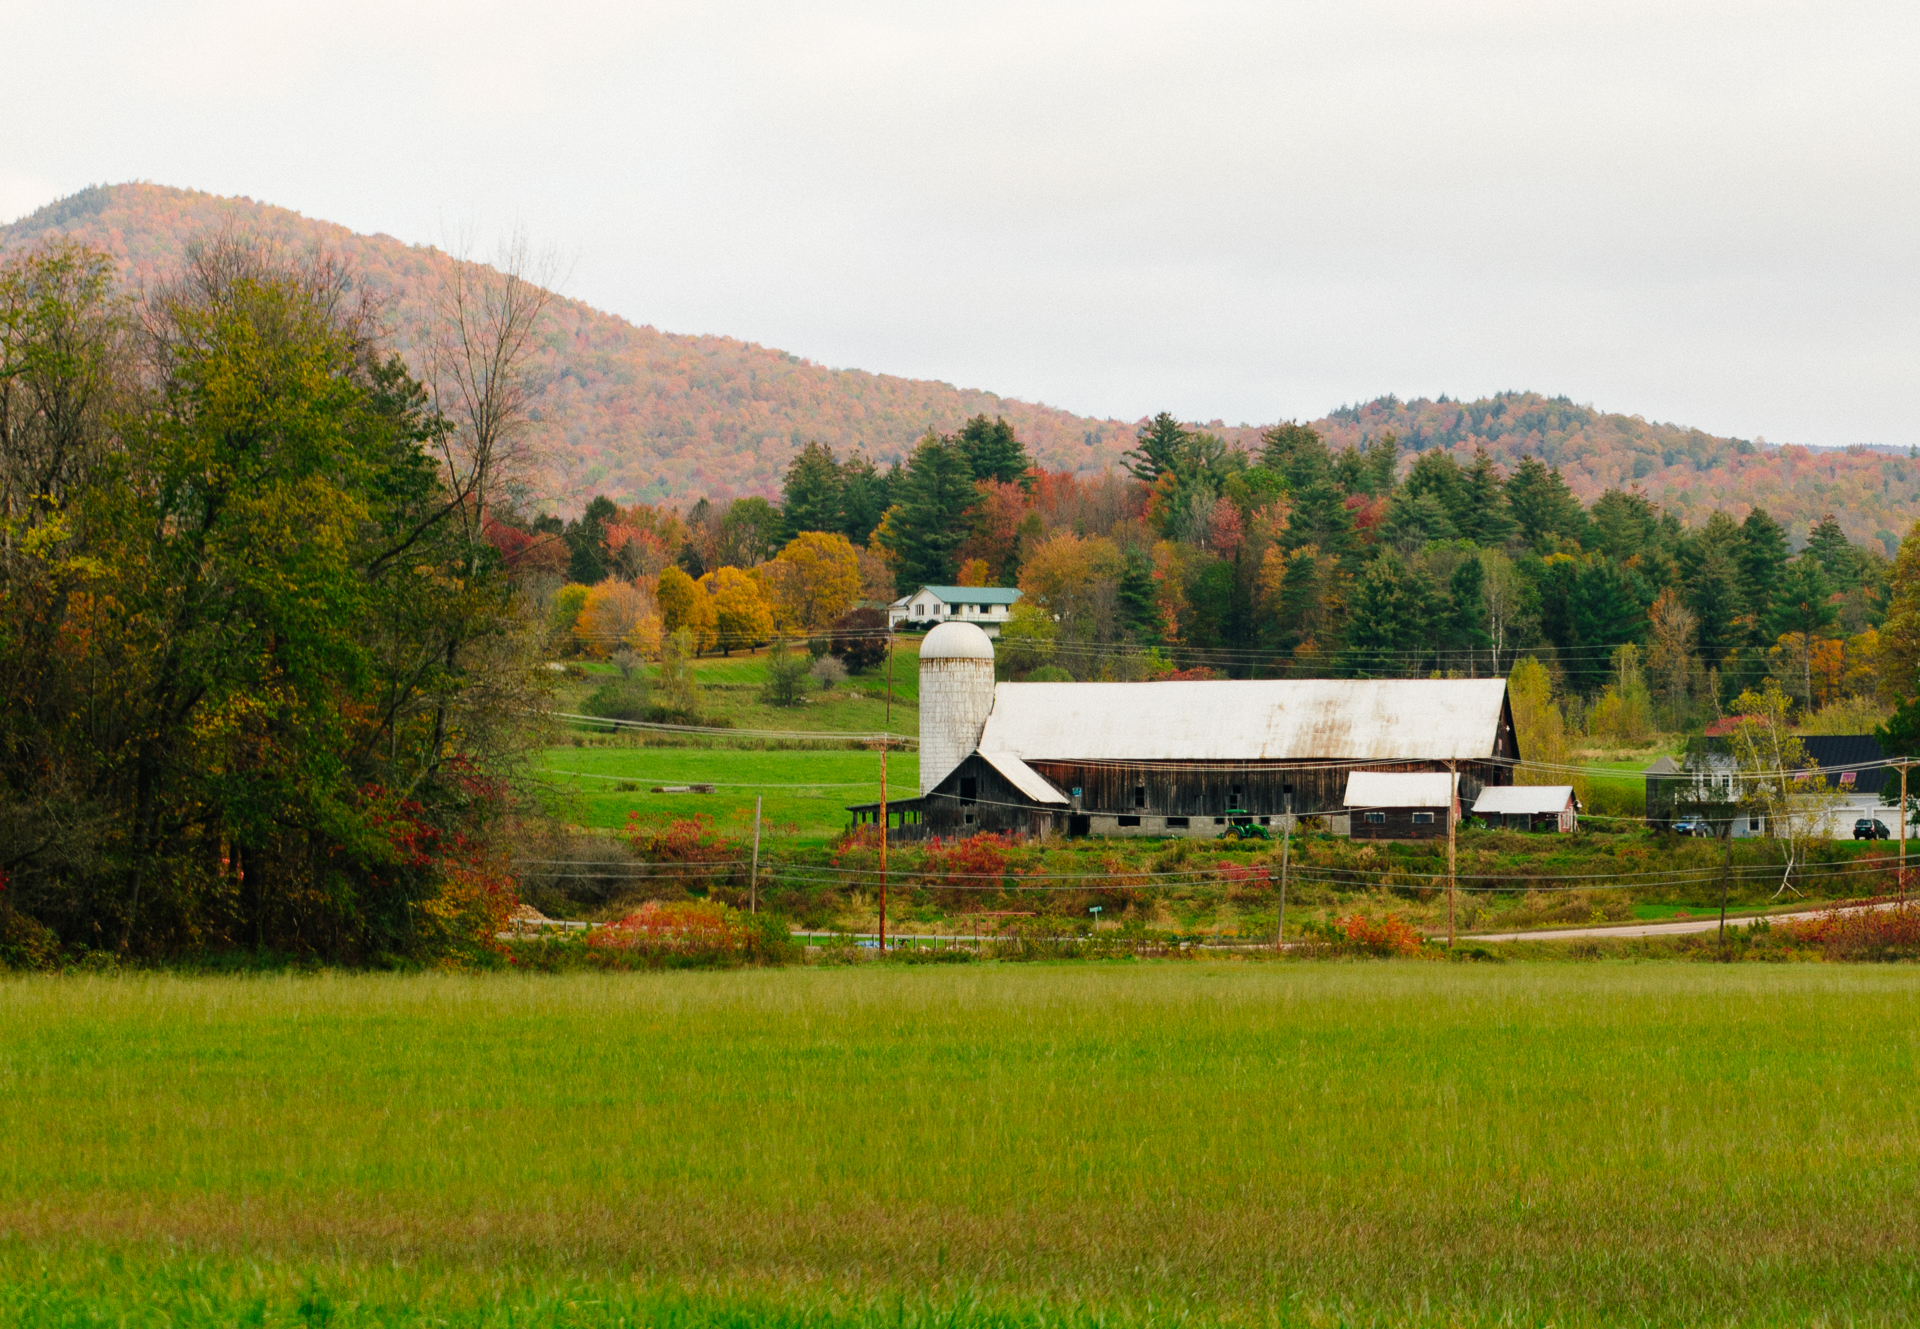 Finding Fall in Waitsfield, Vermont